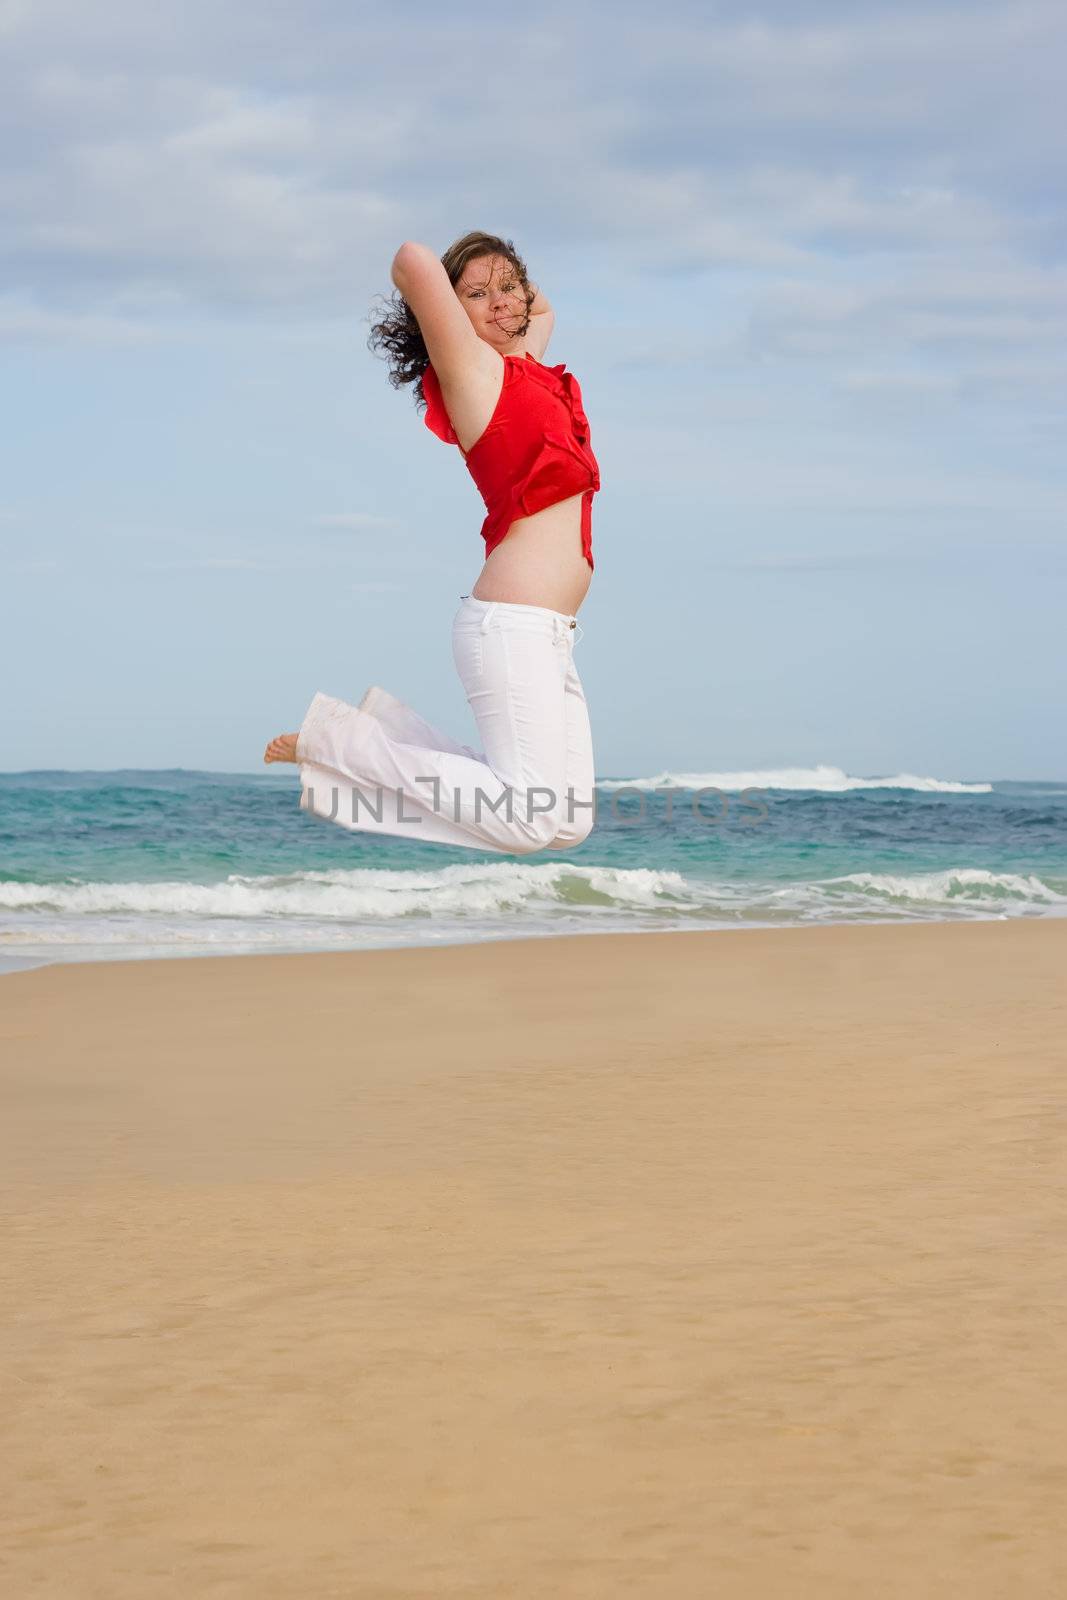 Jumping for joy on the beach wearing red and white